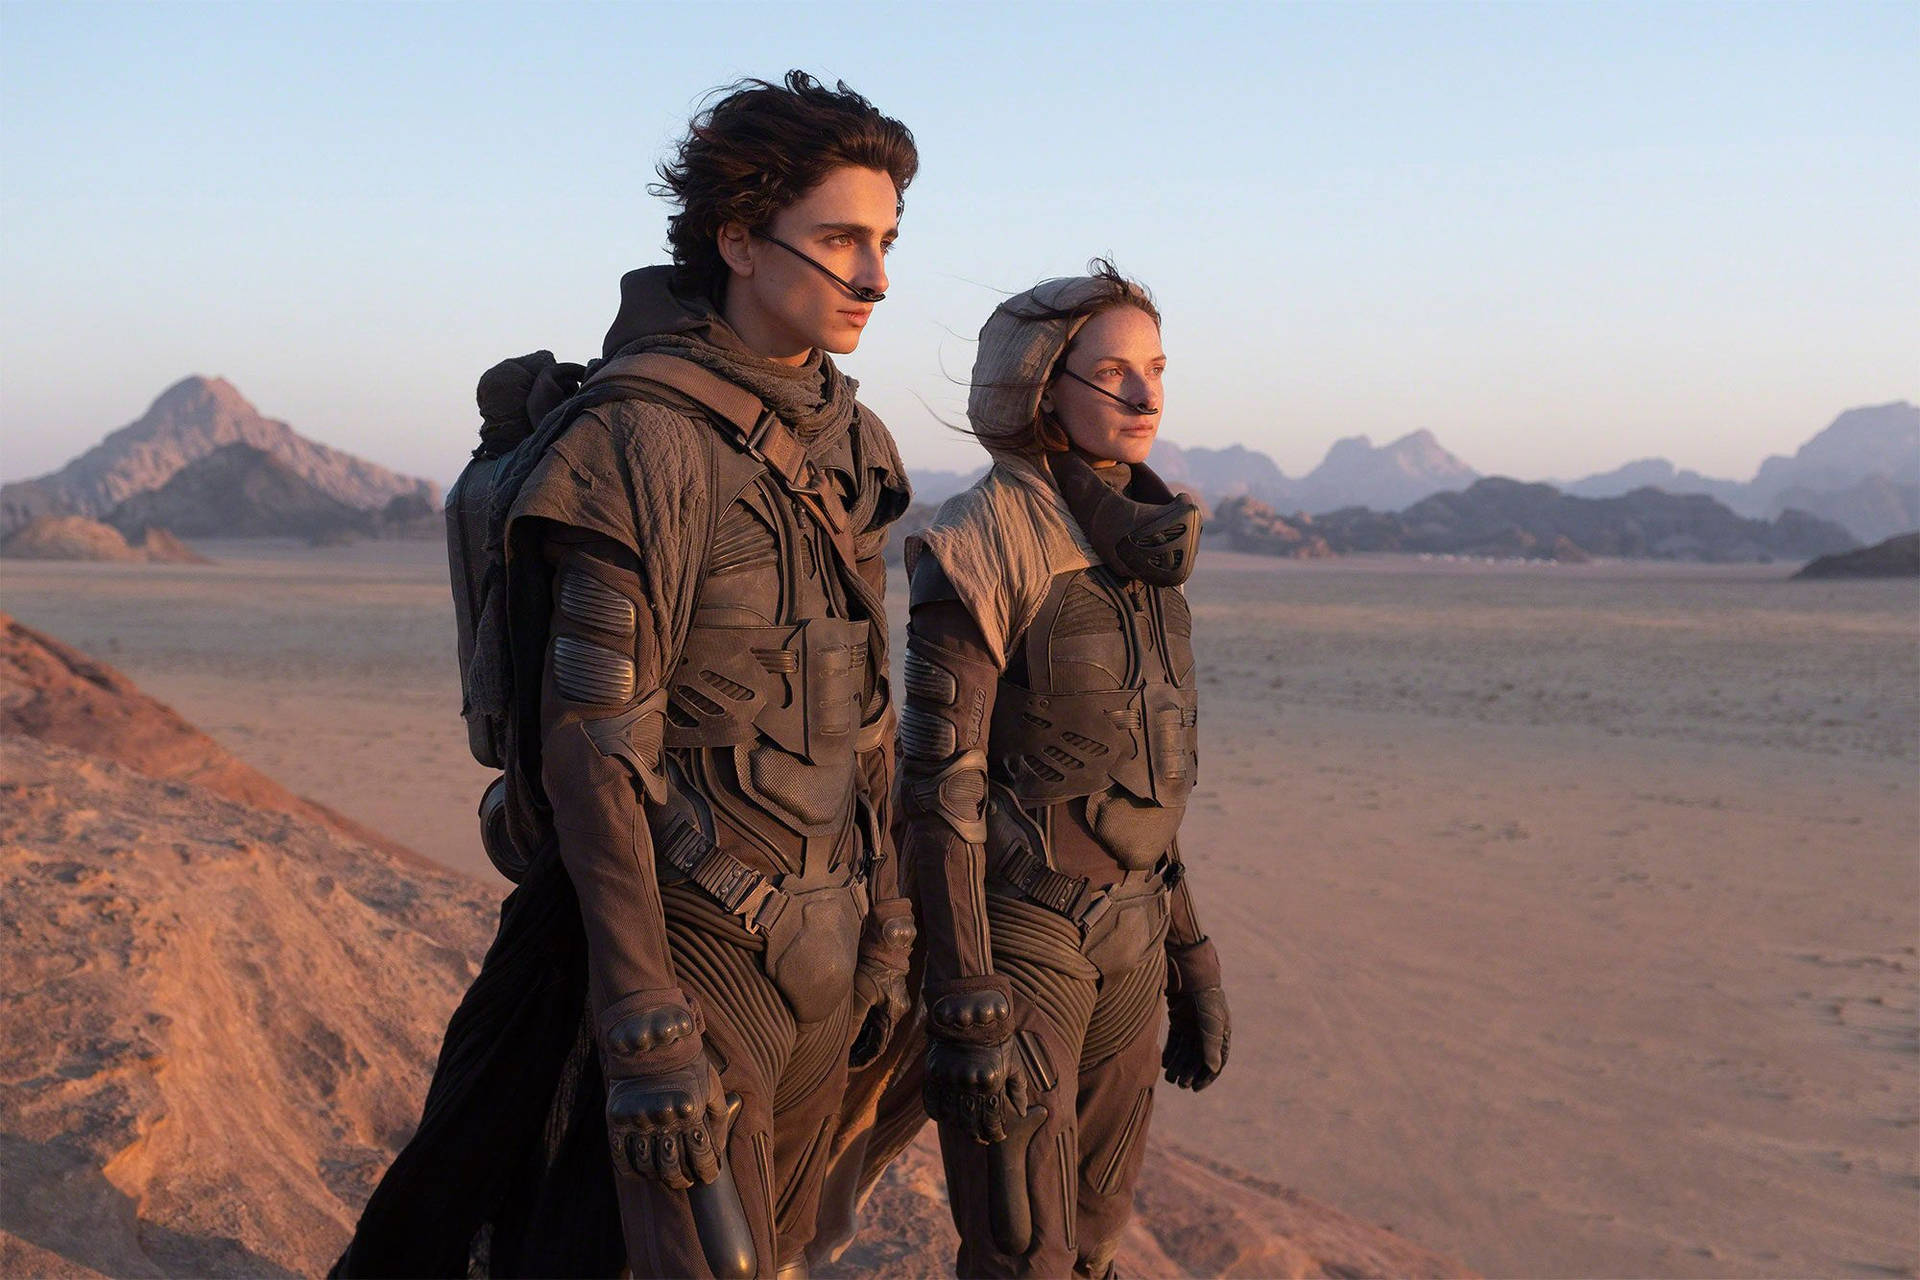 Two People In Space Suits Standing In The Desert Wallpaper